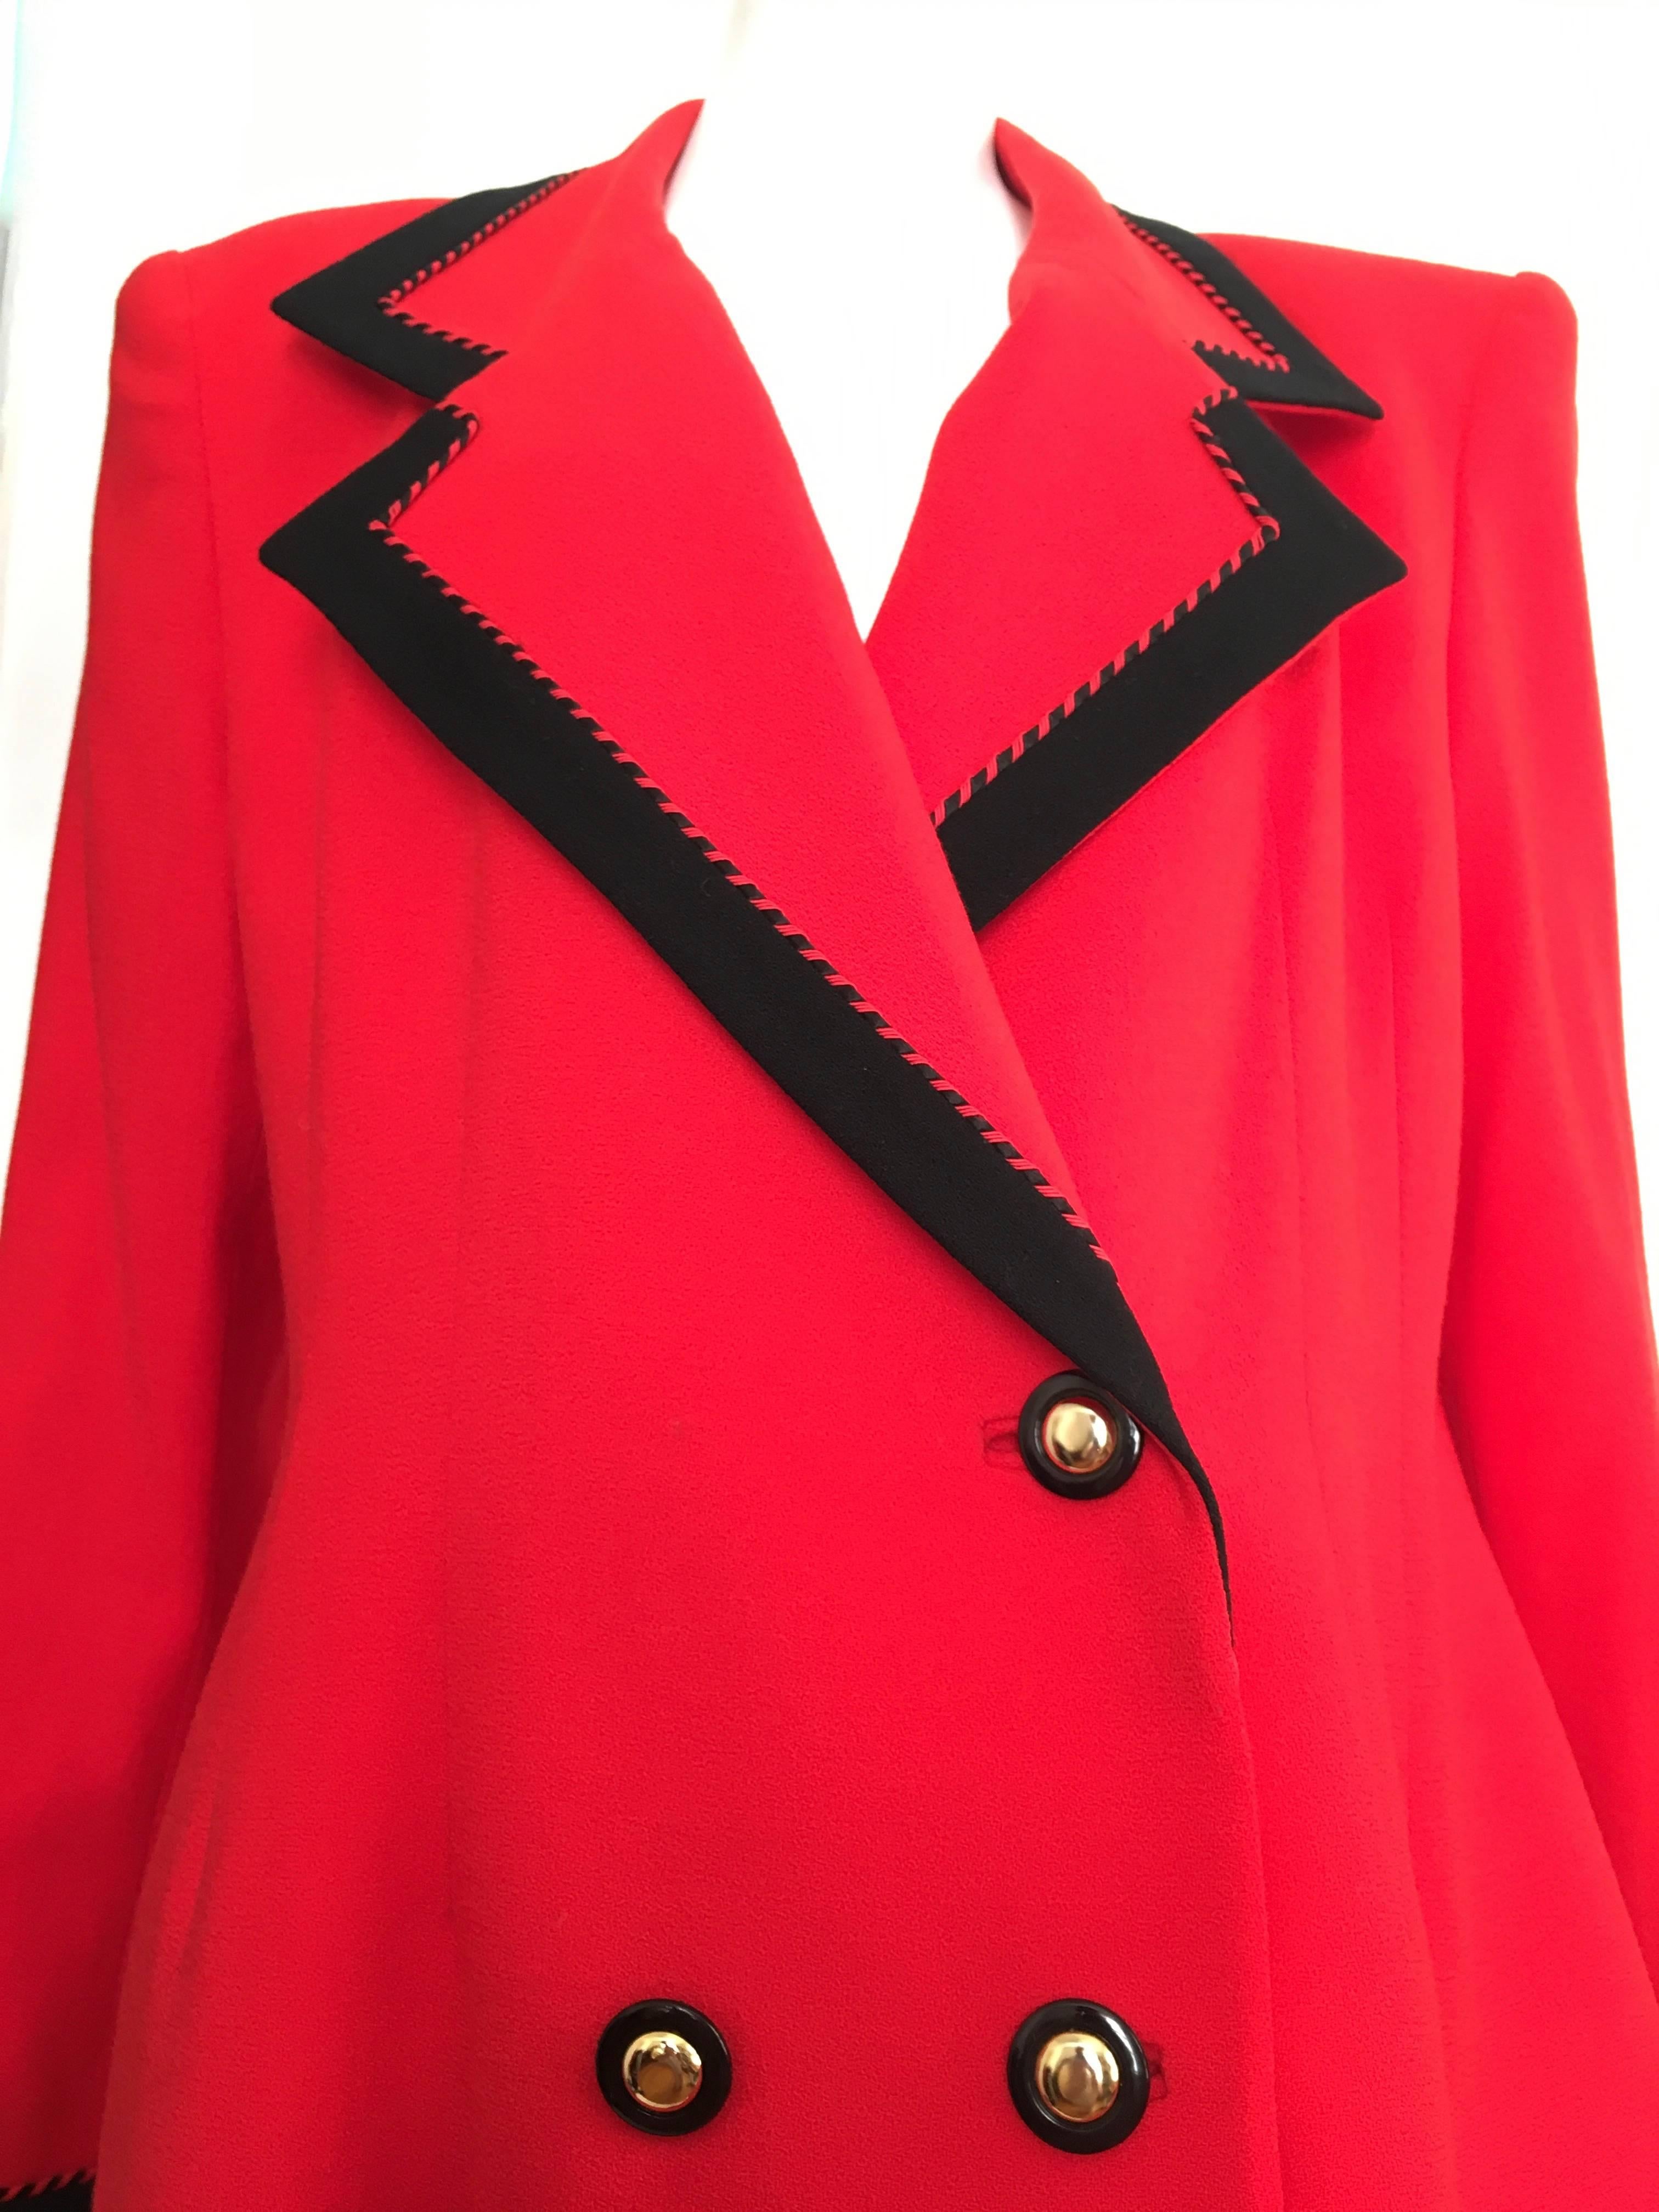 Lilli Ann 1980s bright red wool gold button up coat is a size large so this will fit a size 12 / 14.  The black trim makes this bright red coat pop. Exquisite quality and craftsmanship of this coat isn't seen on today's creations. Lilli Ann